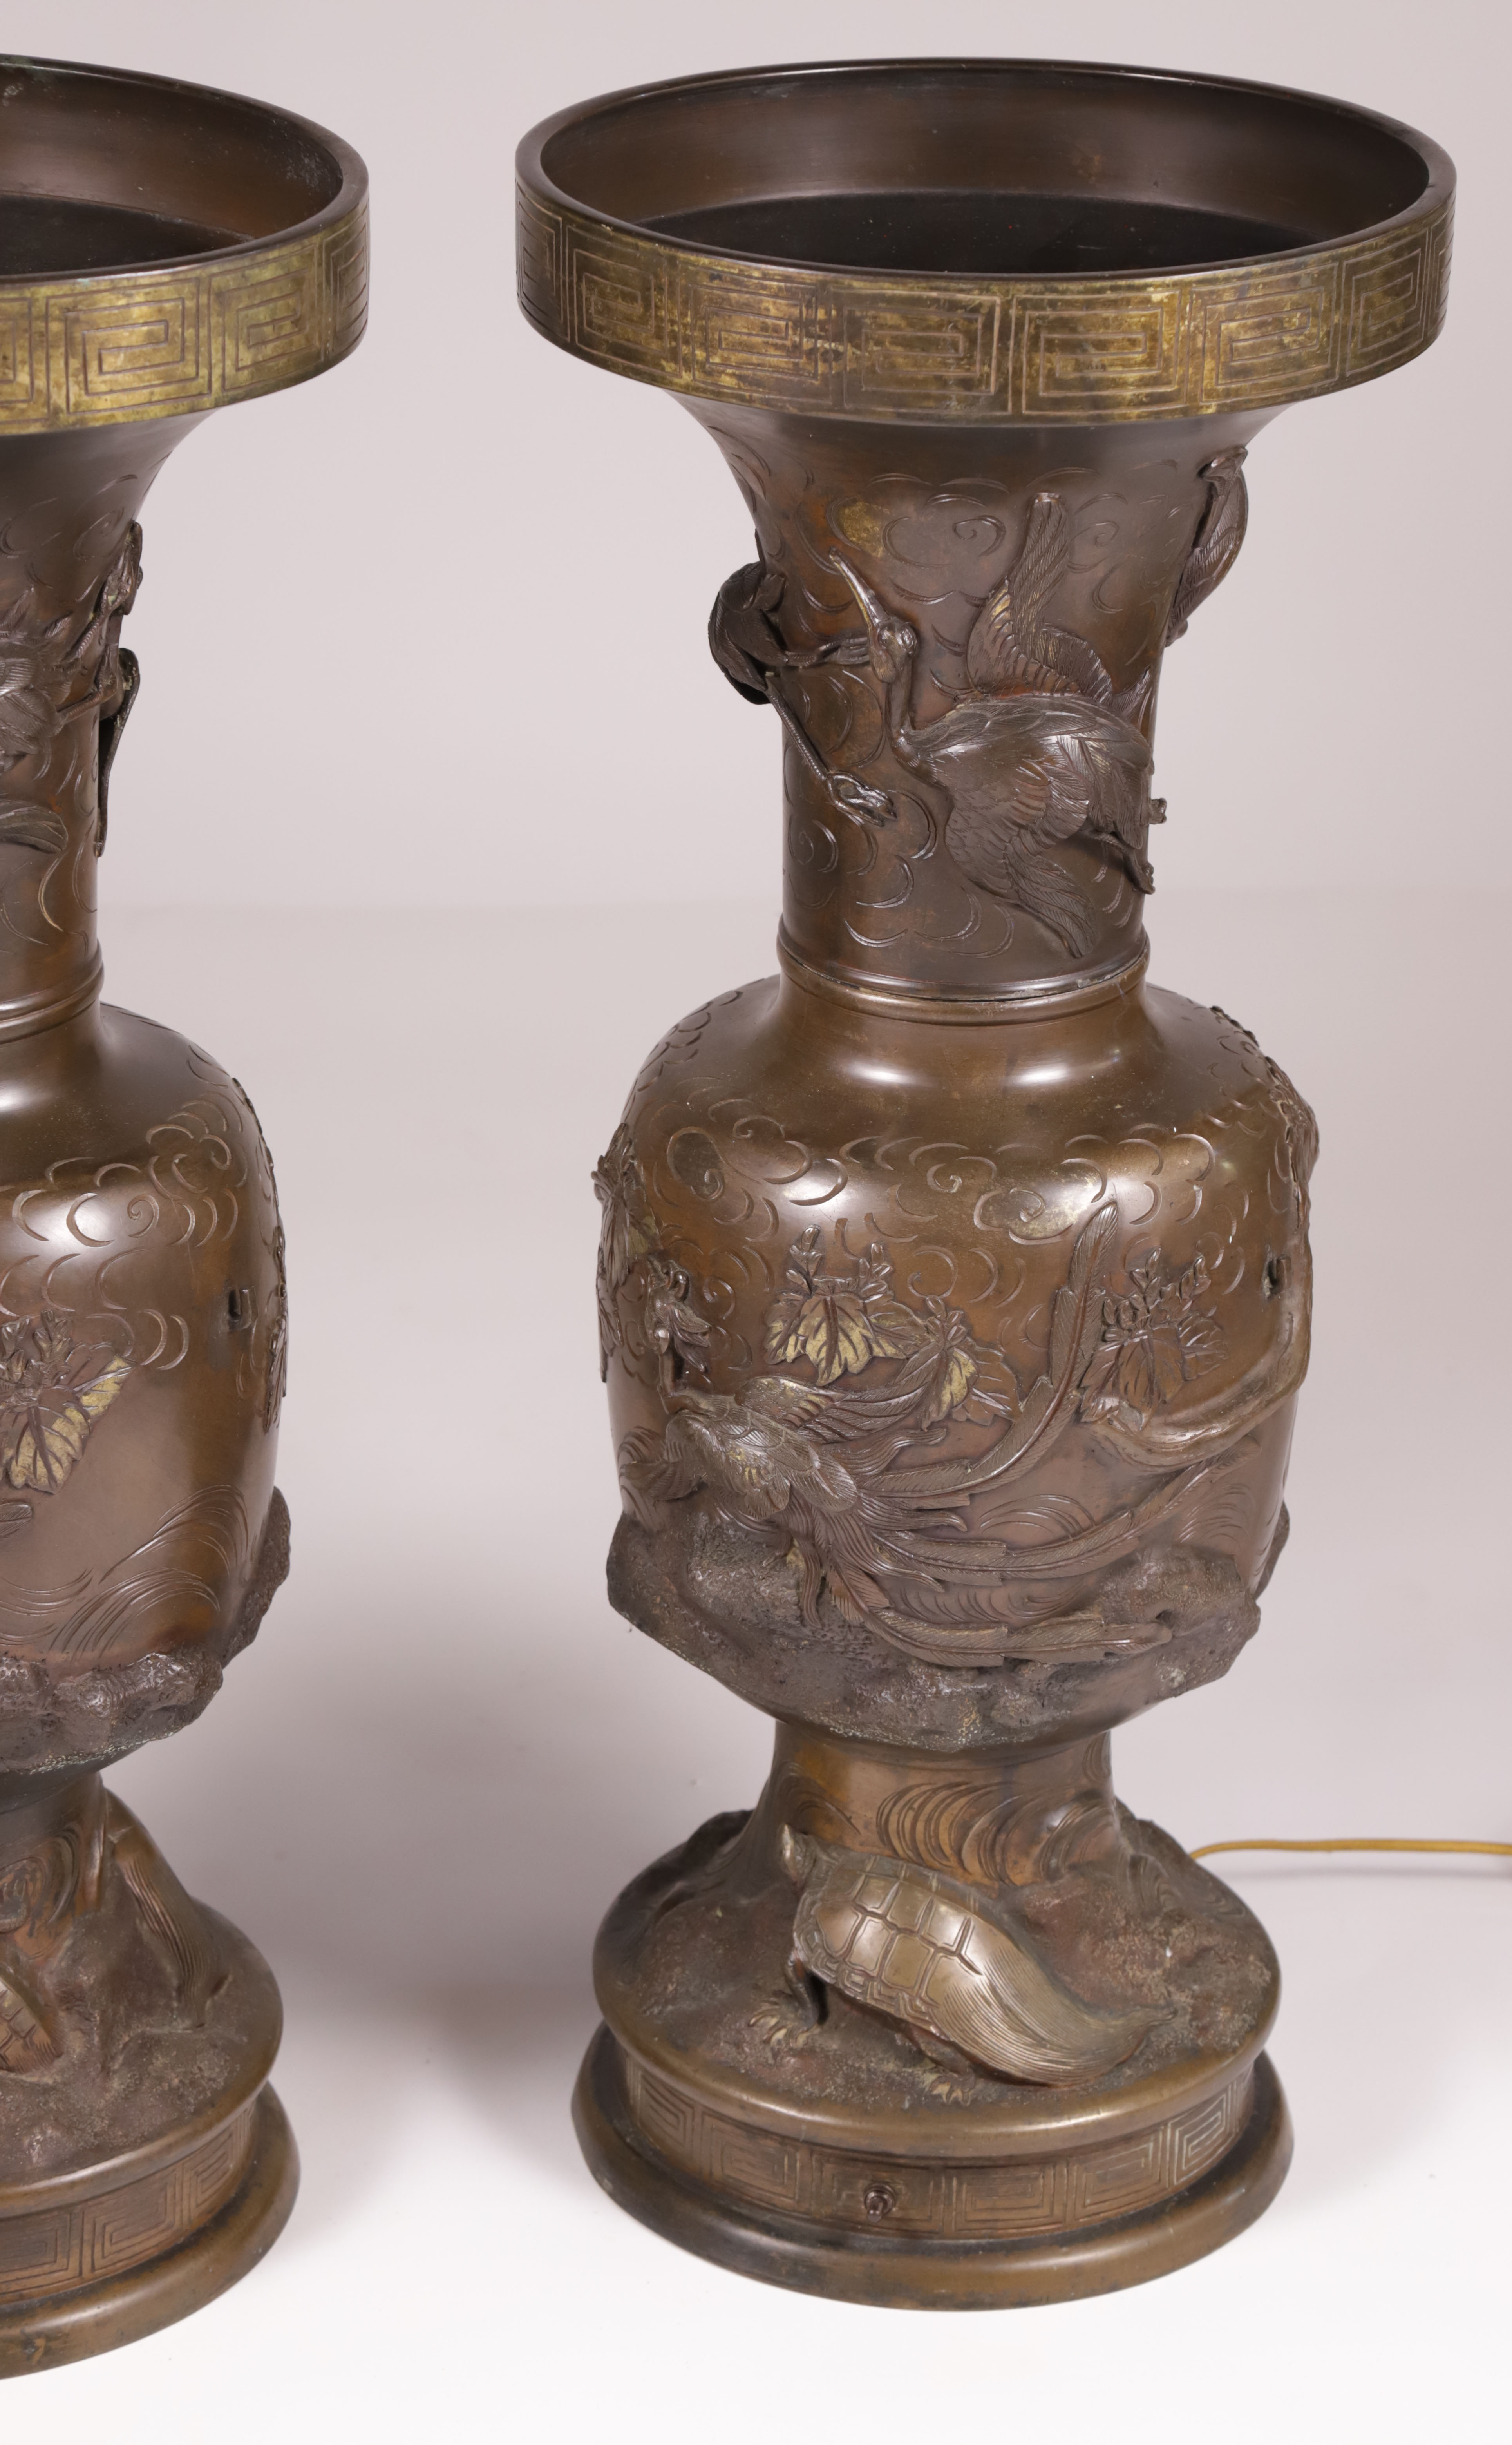 Pair of Chinese Bronze Urns Converted to Lamps